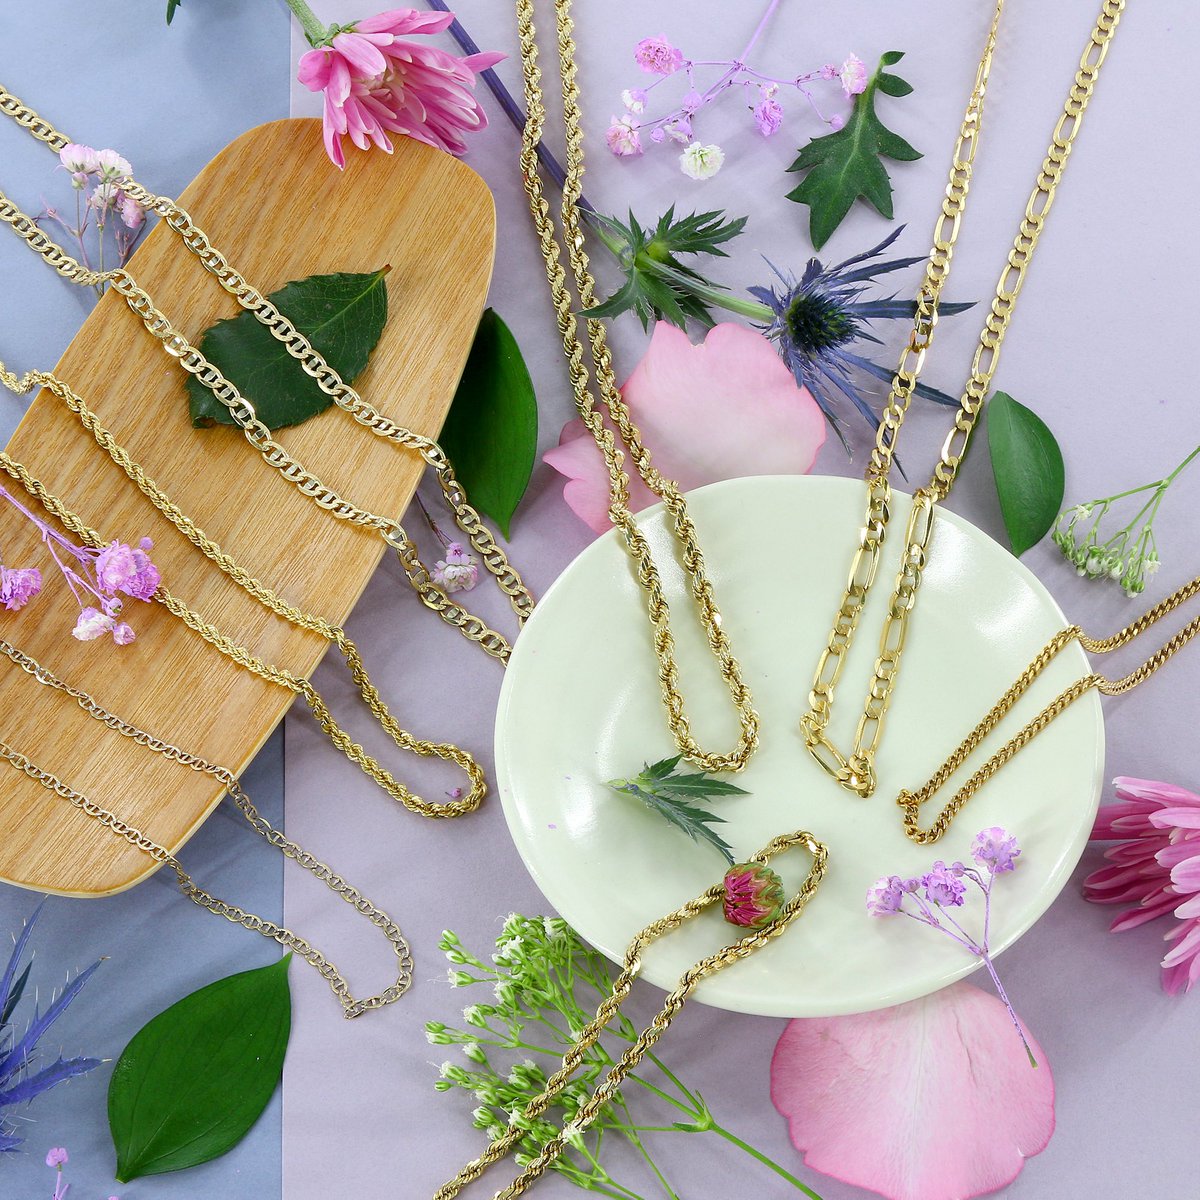 Spring It On 🌸✨ New stock alert! 🌟 Elevate your spring style with our stunning gold chains. 🌼 Perfect for adding a touch of elegance and shine to any look. Link in Bio👀#SpringStyle #GoldChains #GoldJewelry #SpringJewelry #FashionJewelry #luxurypreloved